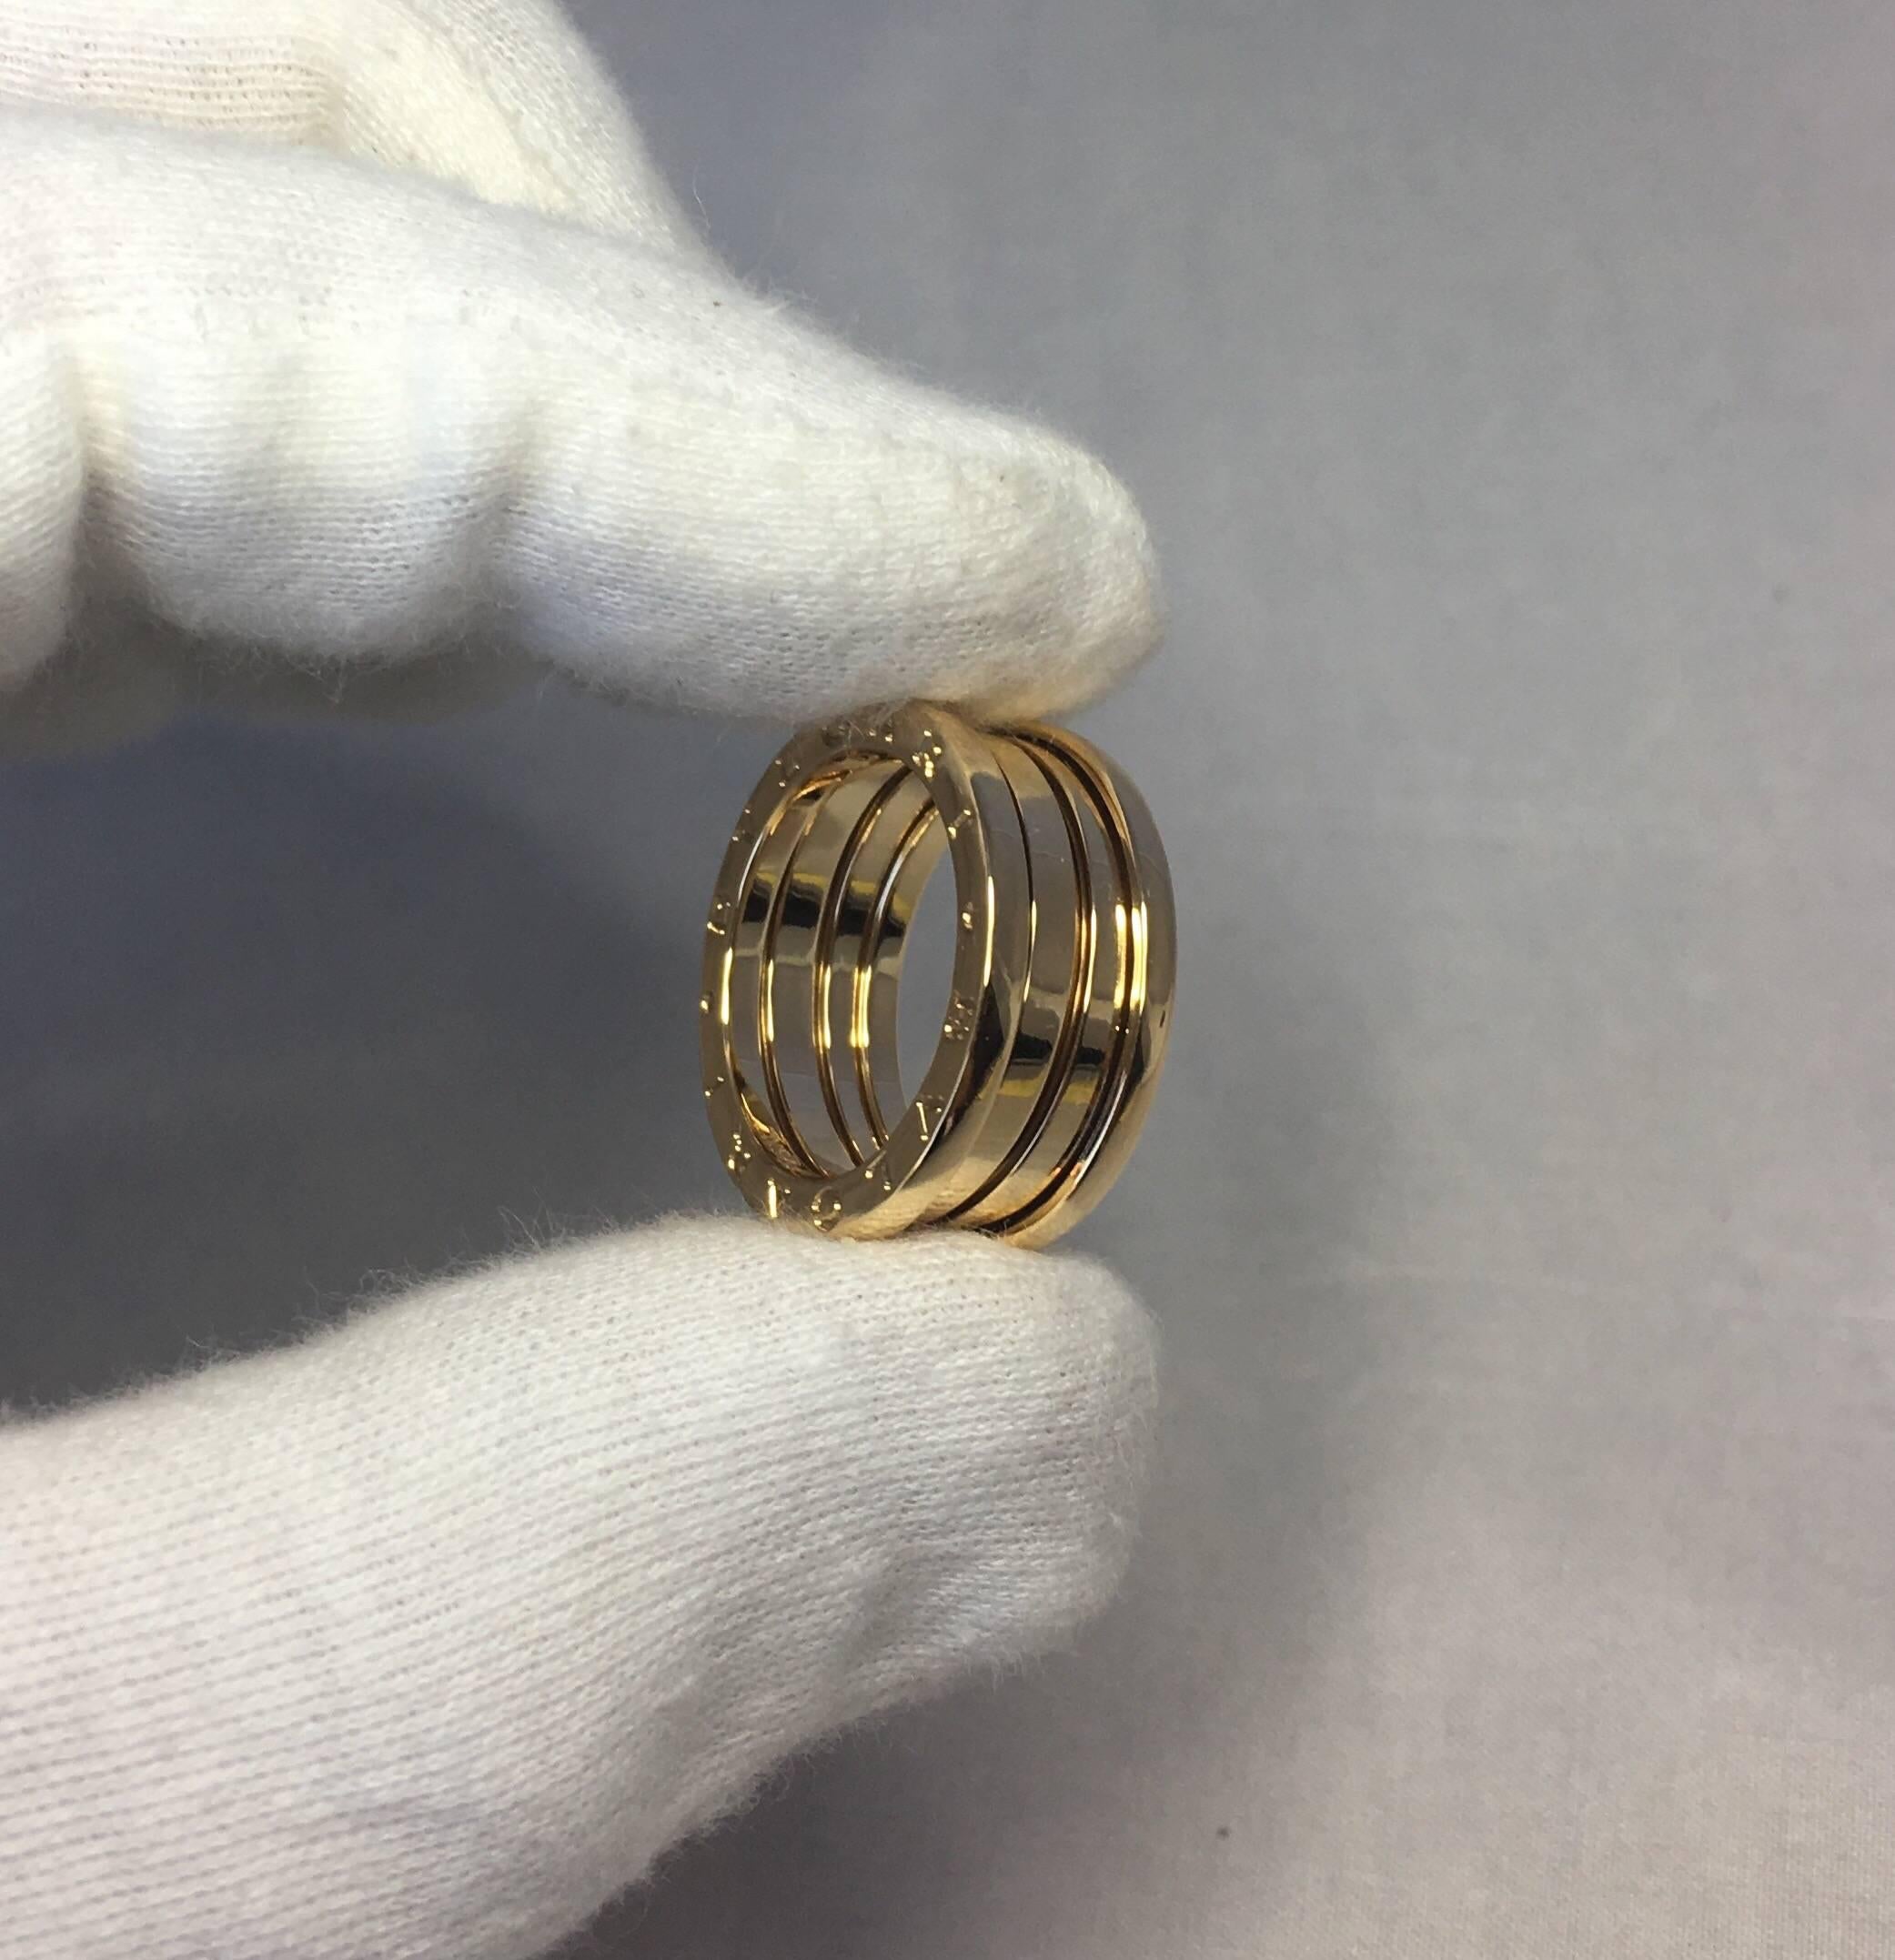 B.Zero1 3-band yellow gold ring. 18k. Very elegant and unique design 'spring' ring.

Comes with original bulgari packaging and boxes (shown in photos)

Basically new - has been professionally re-polished and cleaned. You'll struggle to find a single